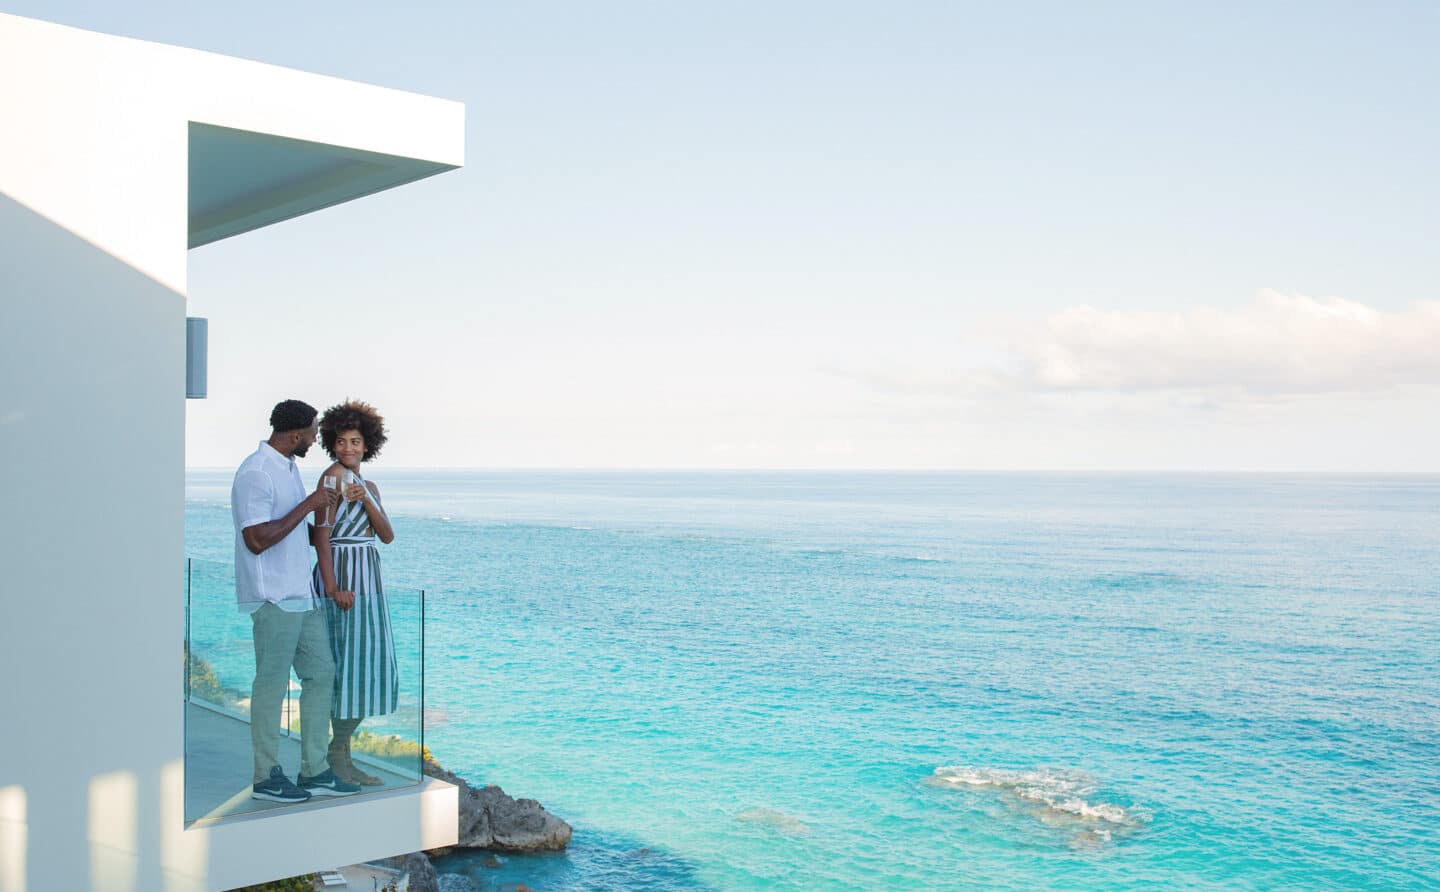 A couple on a balcony overlooking the ocean.